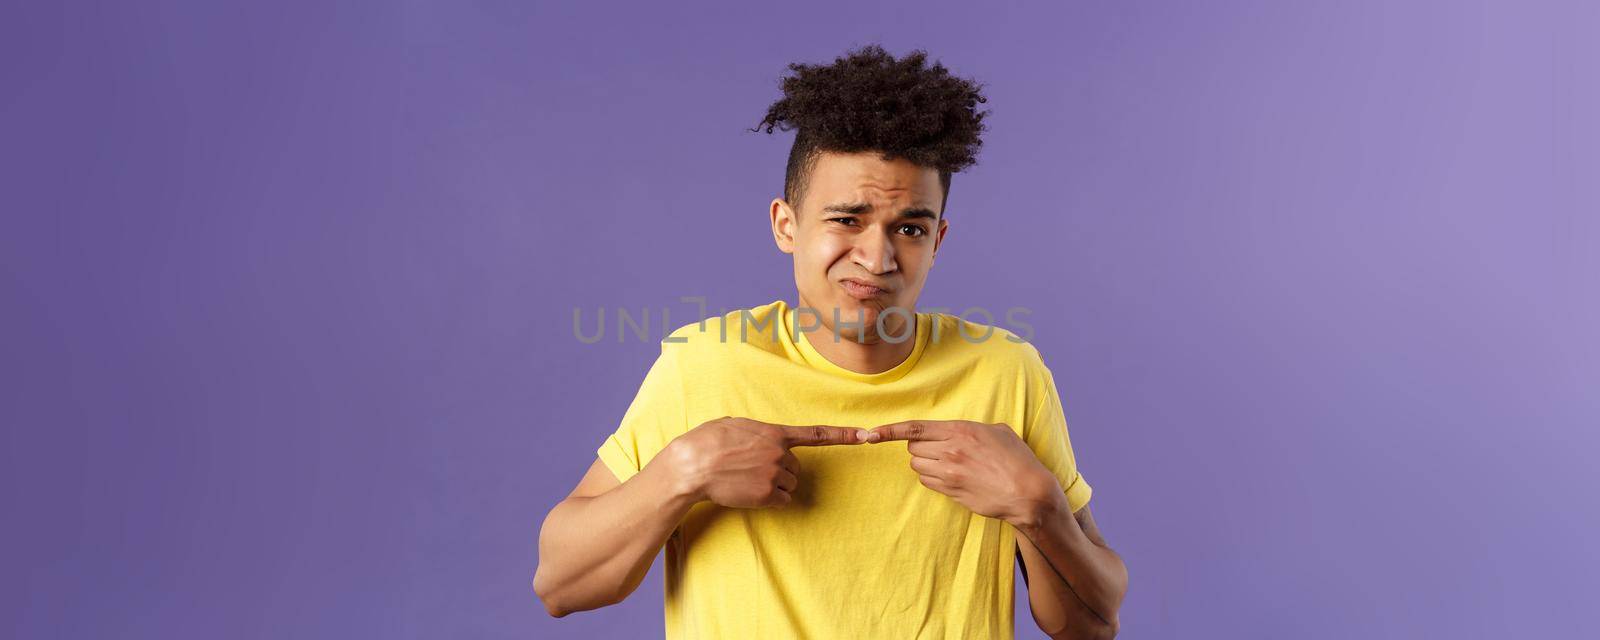 Close-up portrait of shy and modest young silly hispanic man trying say something but being too insecure, grimacing and frowning, look timid, two fingers touching pose, purple background.